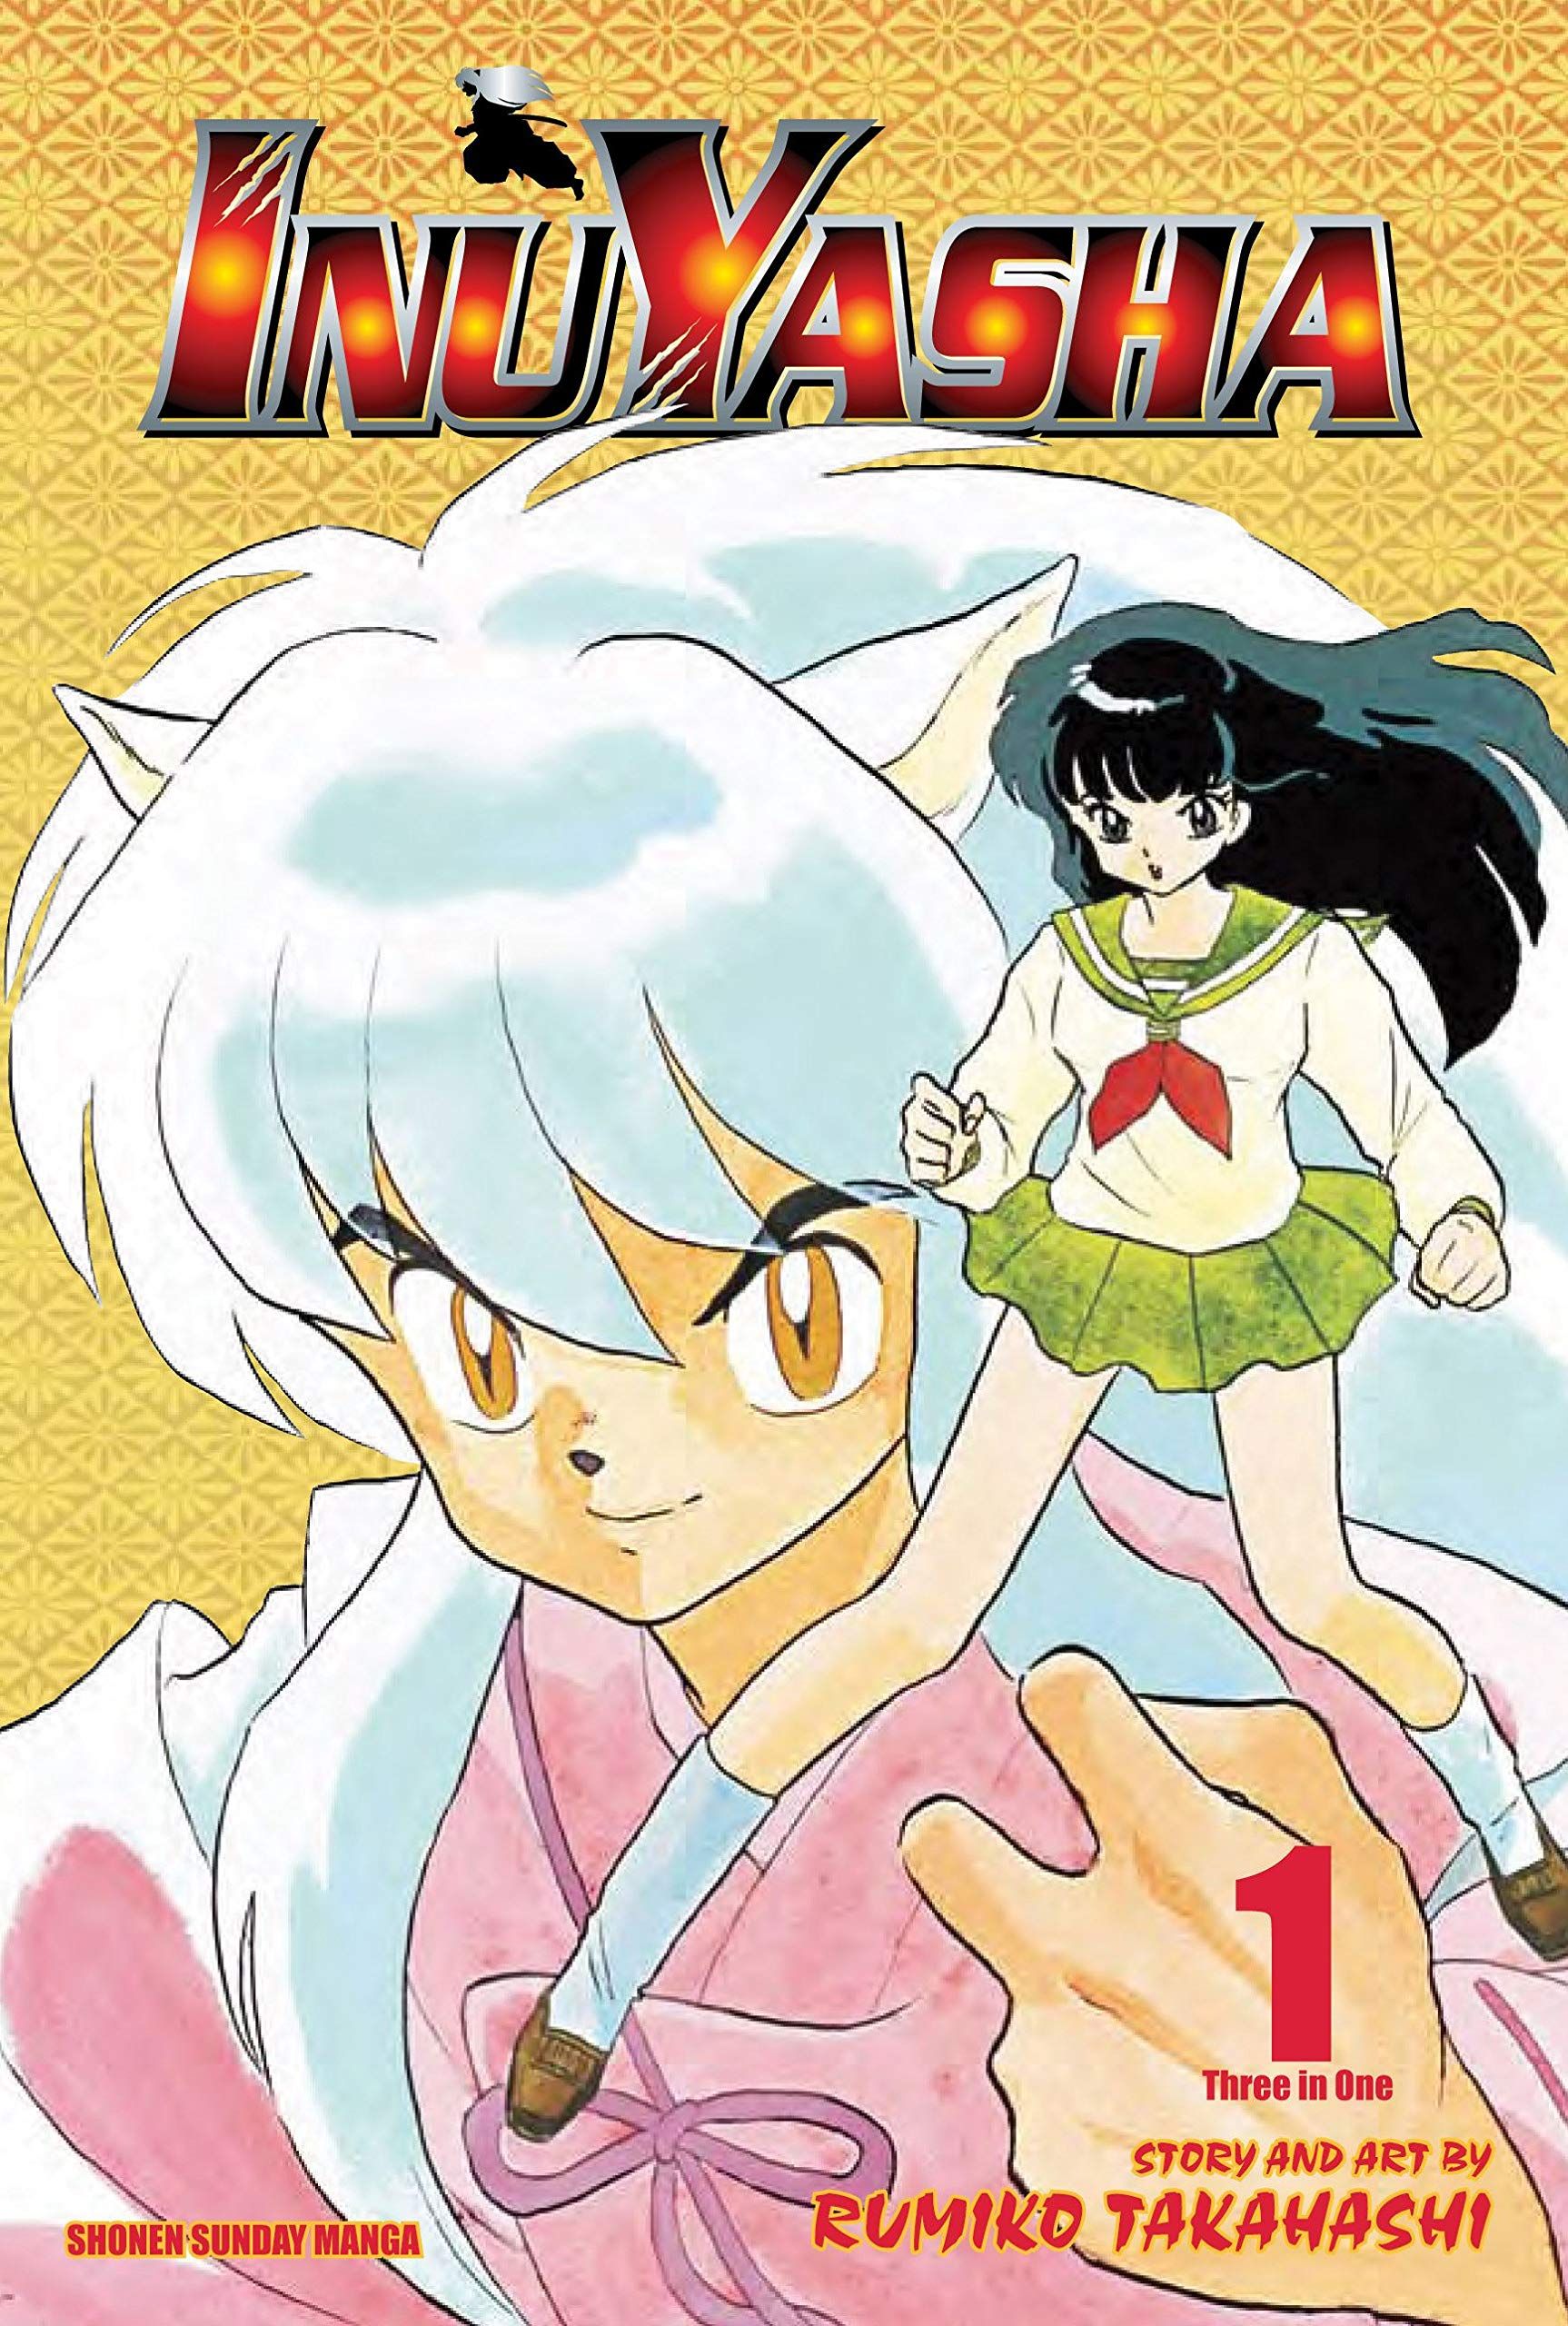 cover of Inuyasha by Rumiko Takahashi cover